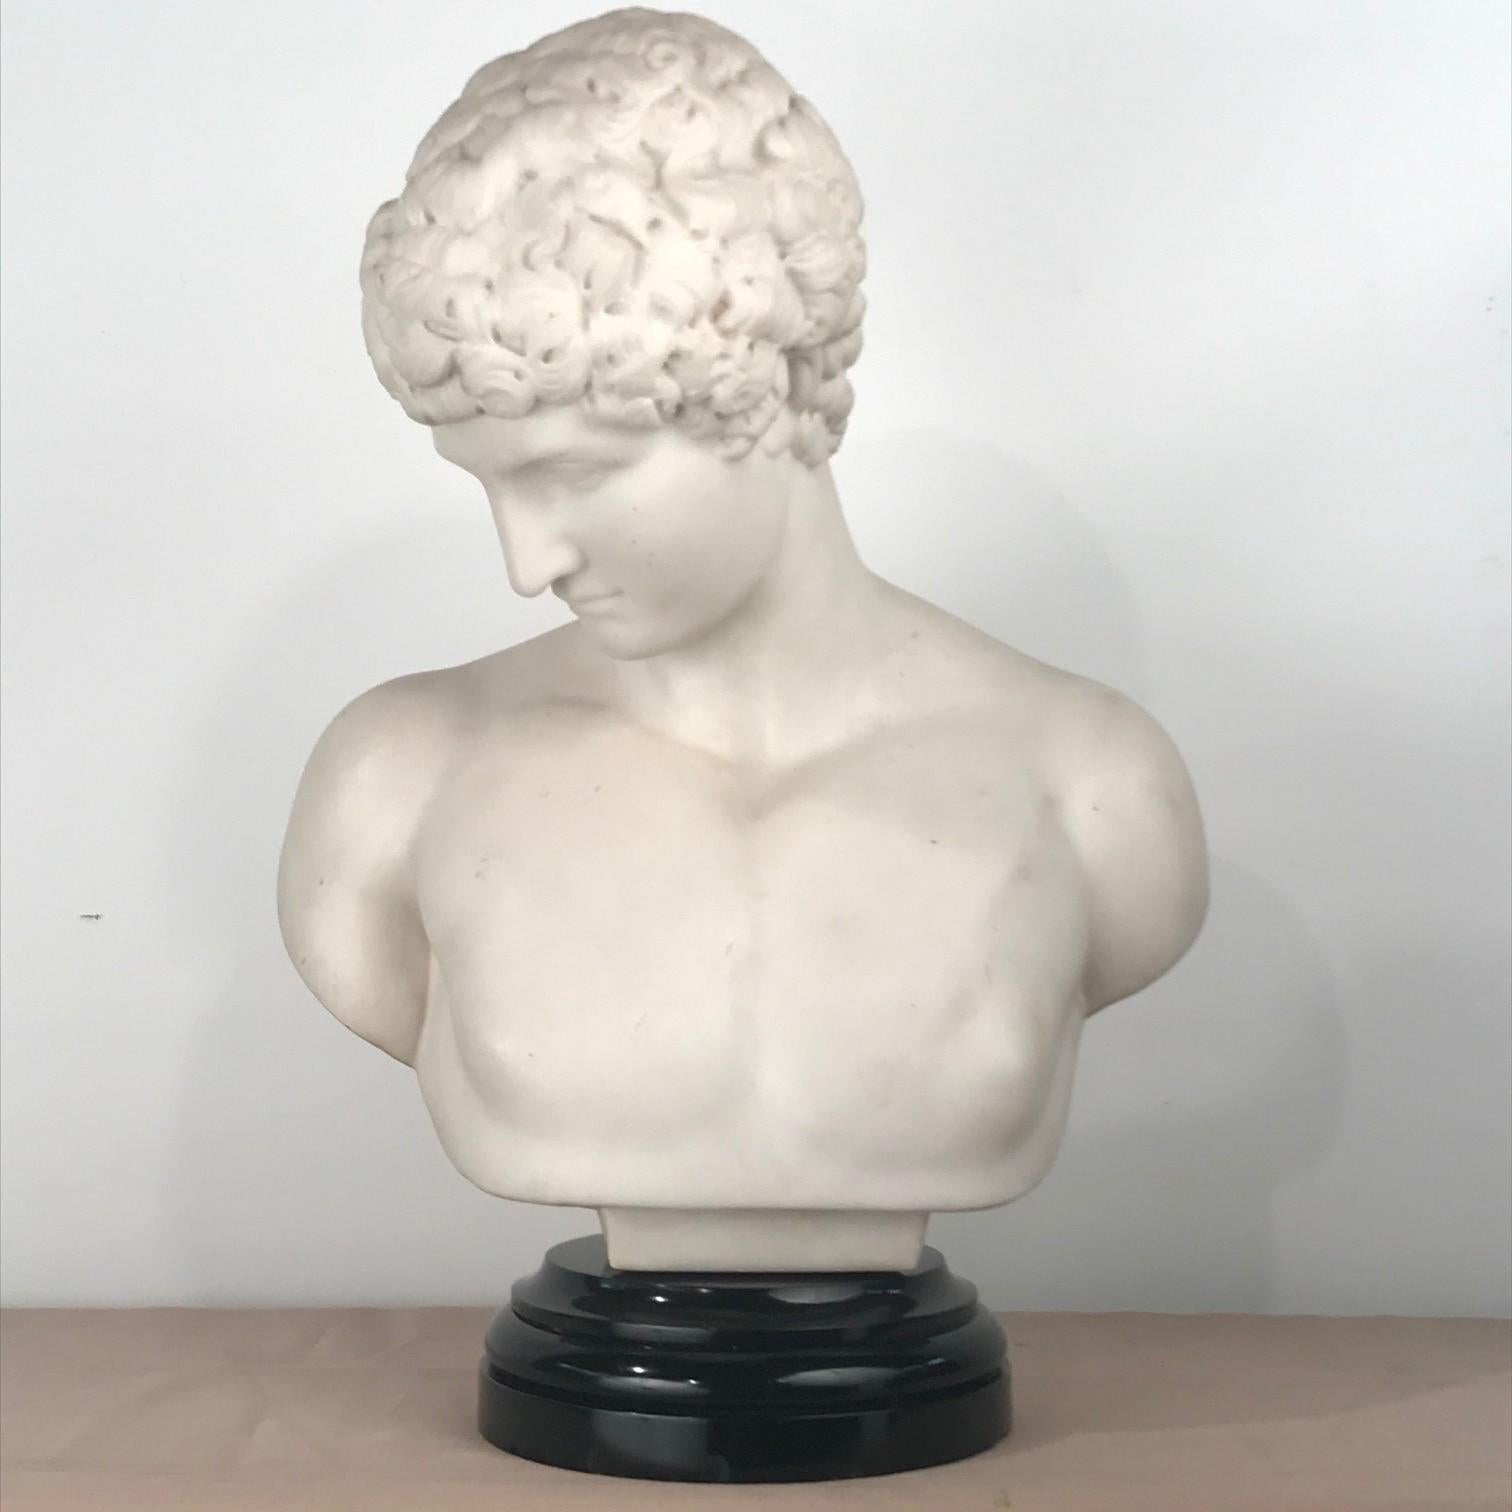 The elegant features of the young Antinous, a favourite of beloved Roman emperor Hadrian, are masterfully captured with exceptional richness in this marble bust of this beautiful boy. The lifelike details of his handsome face, with a straight nose